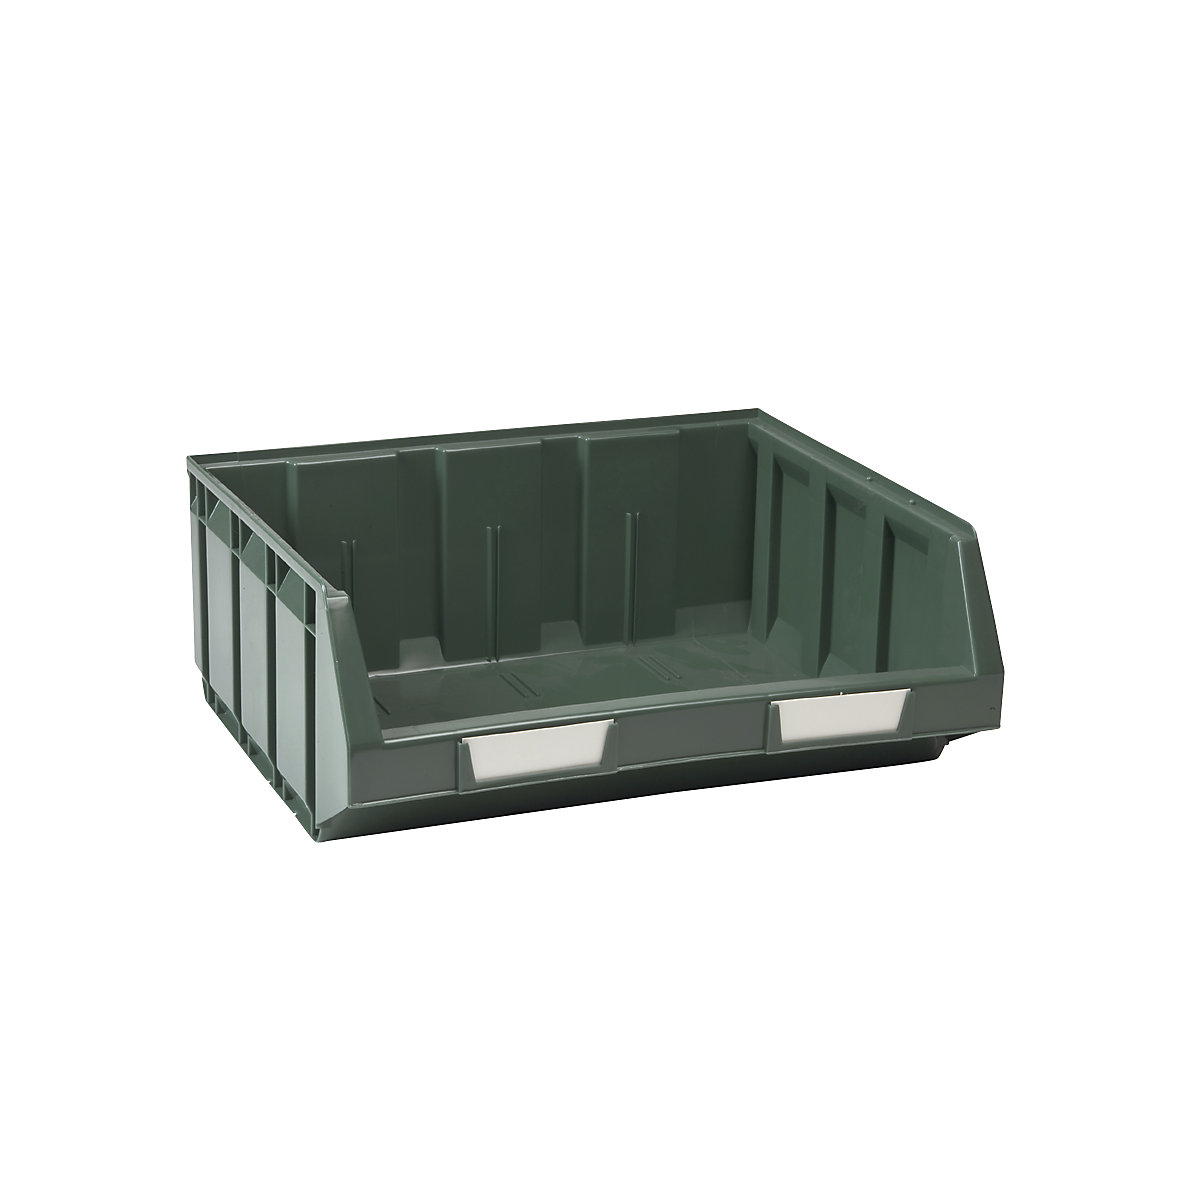 Open fronted storage bin made of polyethylene, LxWxH 345 x 410 x 164 mm, green, pack of 8-9